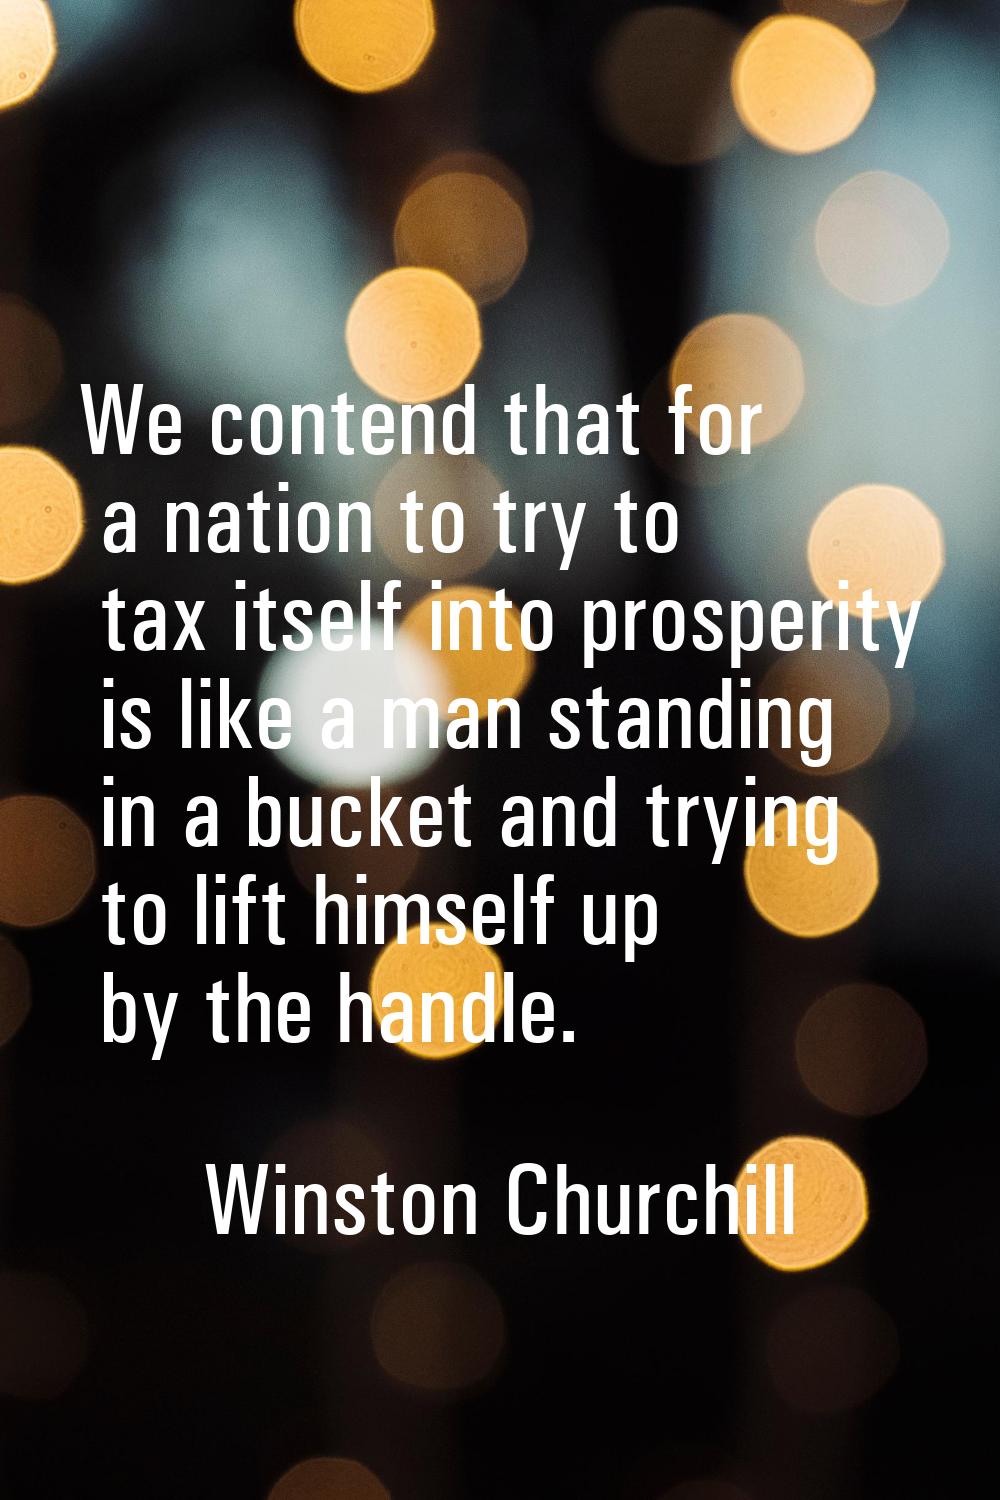 We contend that for a nation to try to tax itself into prosperity is like a man standing in a bucke